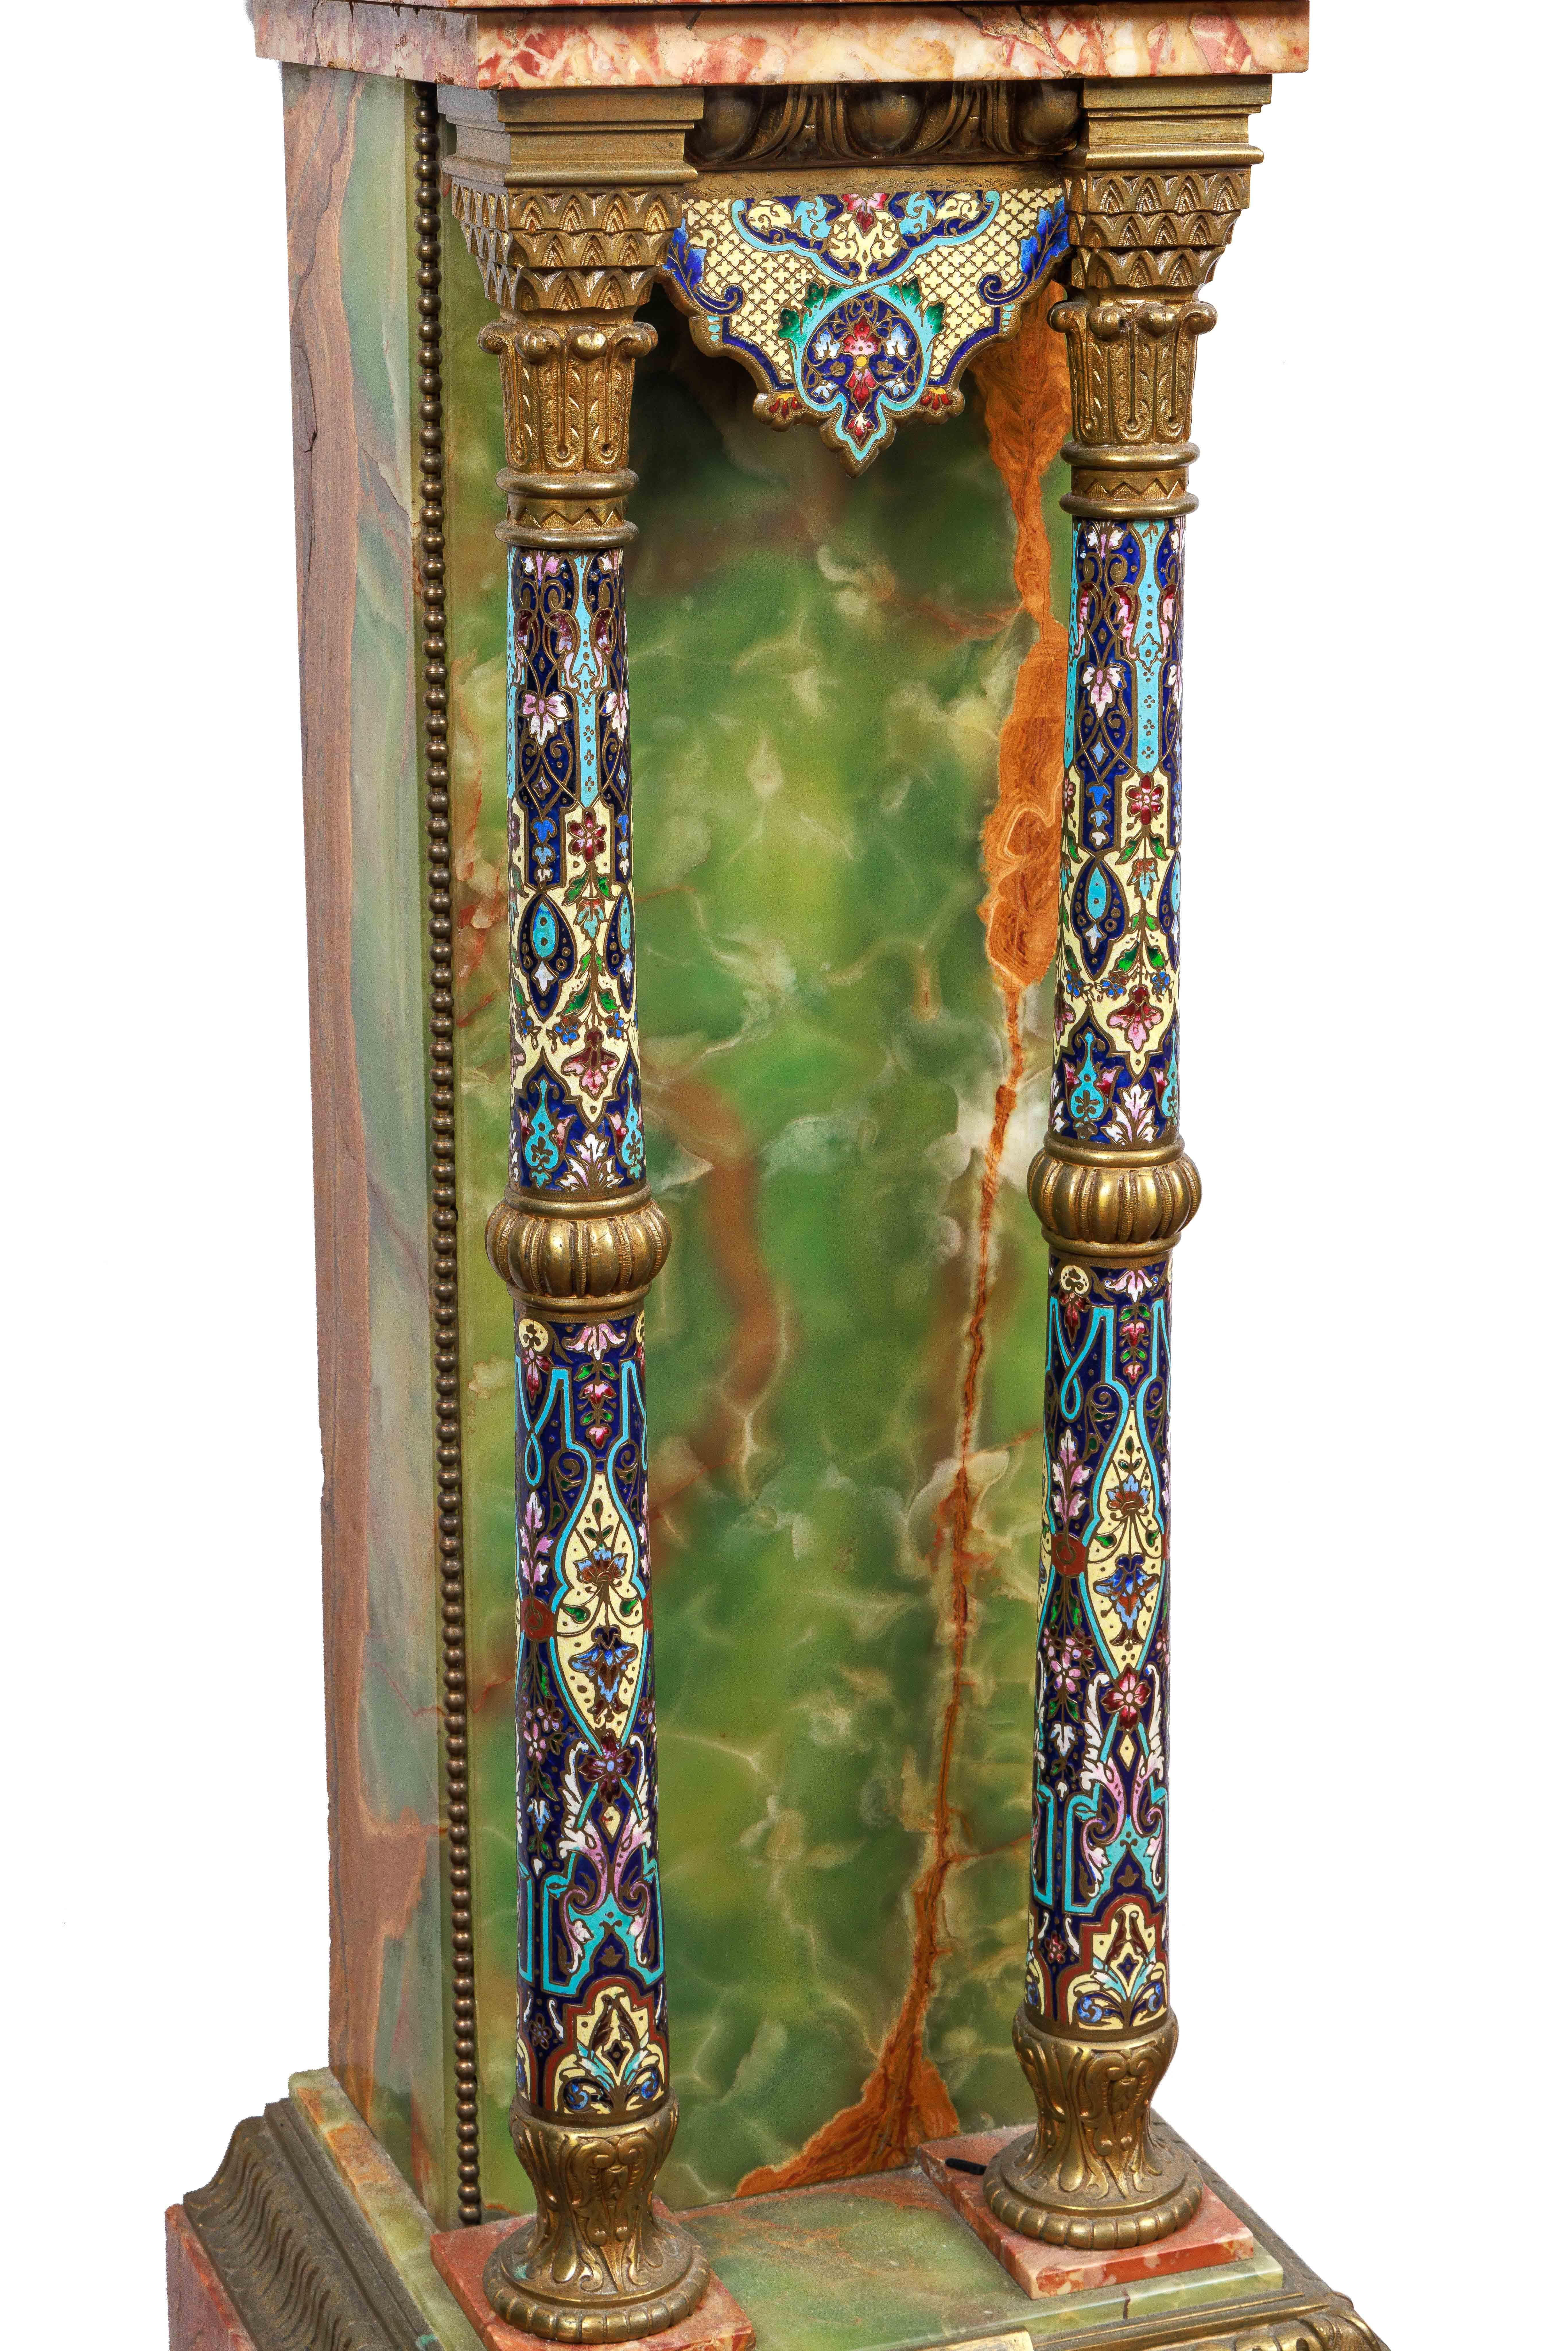 19th Century French Gilt-Bronze, Champleve Enamel, Onyx, and Marble Pedestal Clock, C. 1880